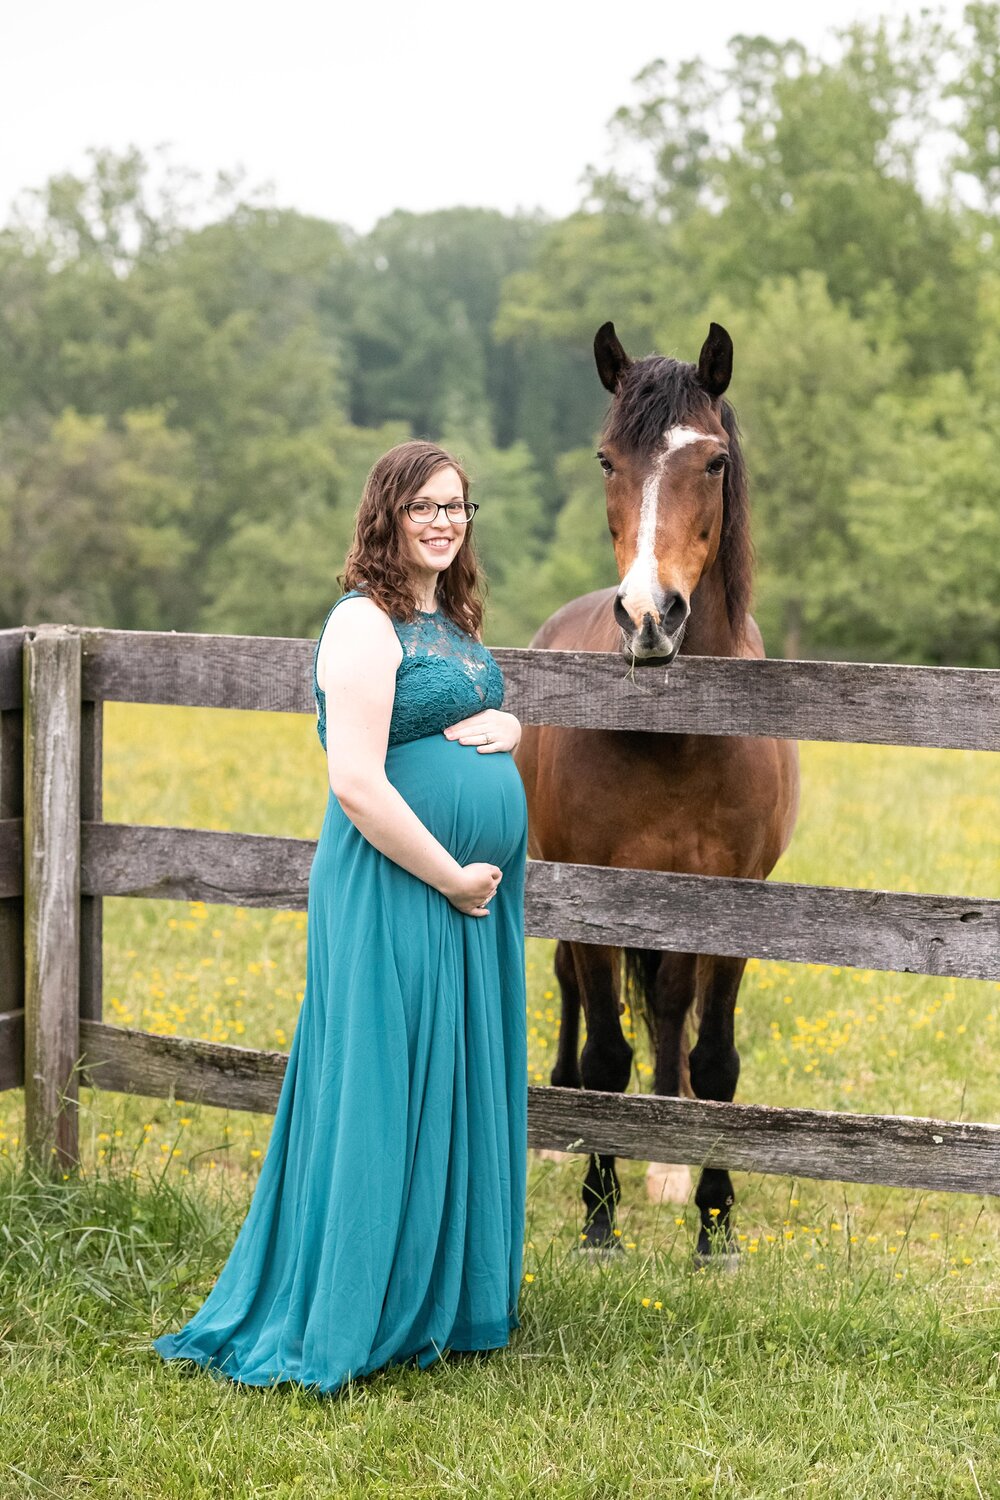 Frederick MD maternity portraits on a family farm near Lake Linganore by Wendy Zook Photography | expecting mother poses by horse on farm